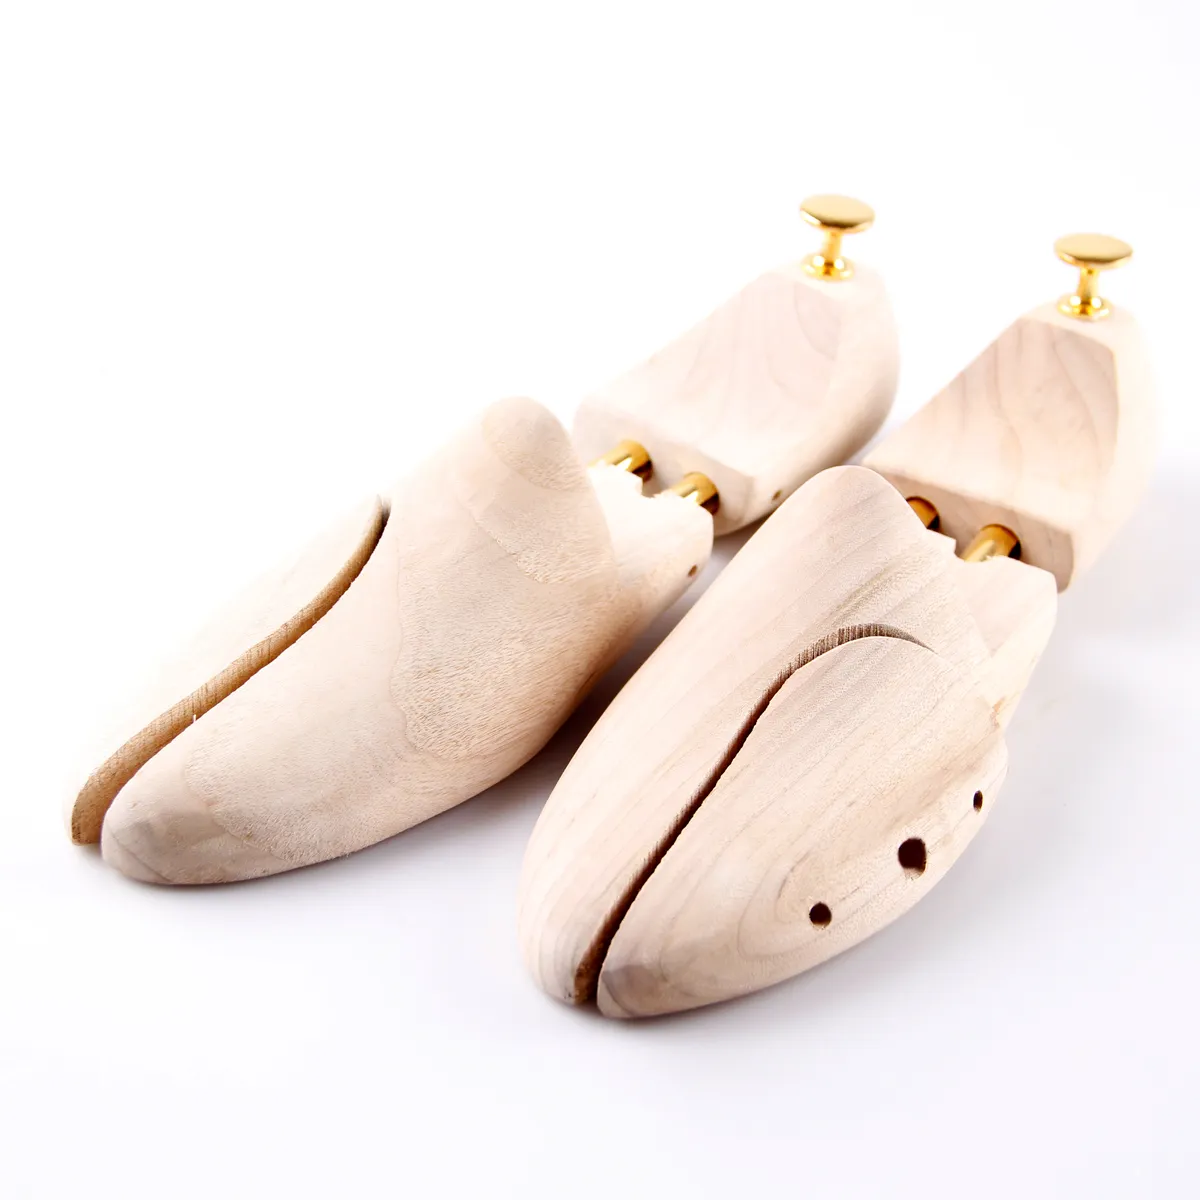 customized  beech wood shoe tree/comfort wooden shoetree/wooden shoe stretcher with smooth surface